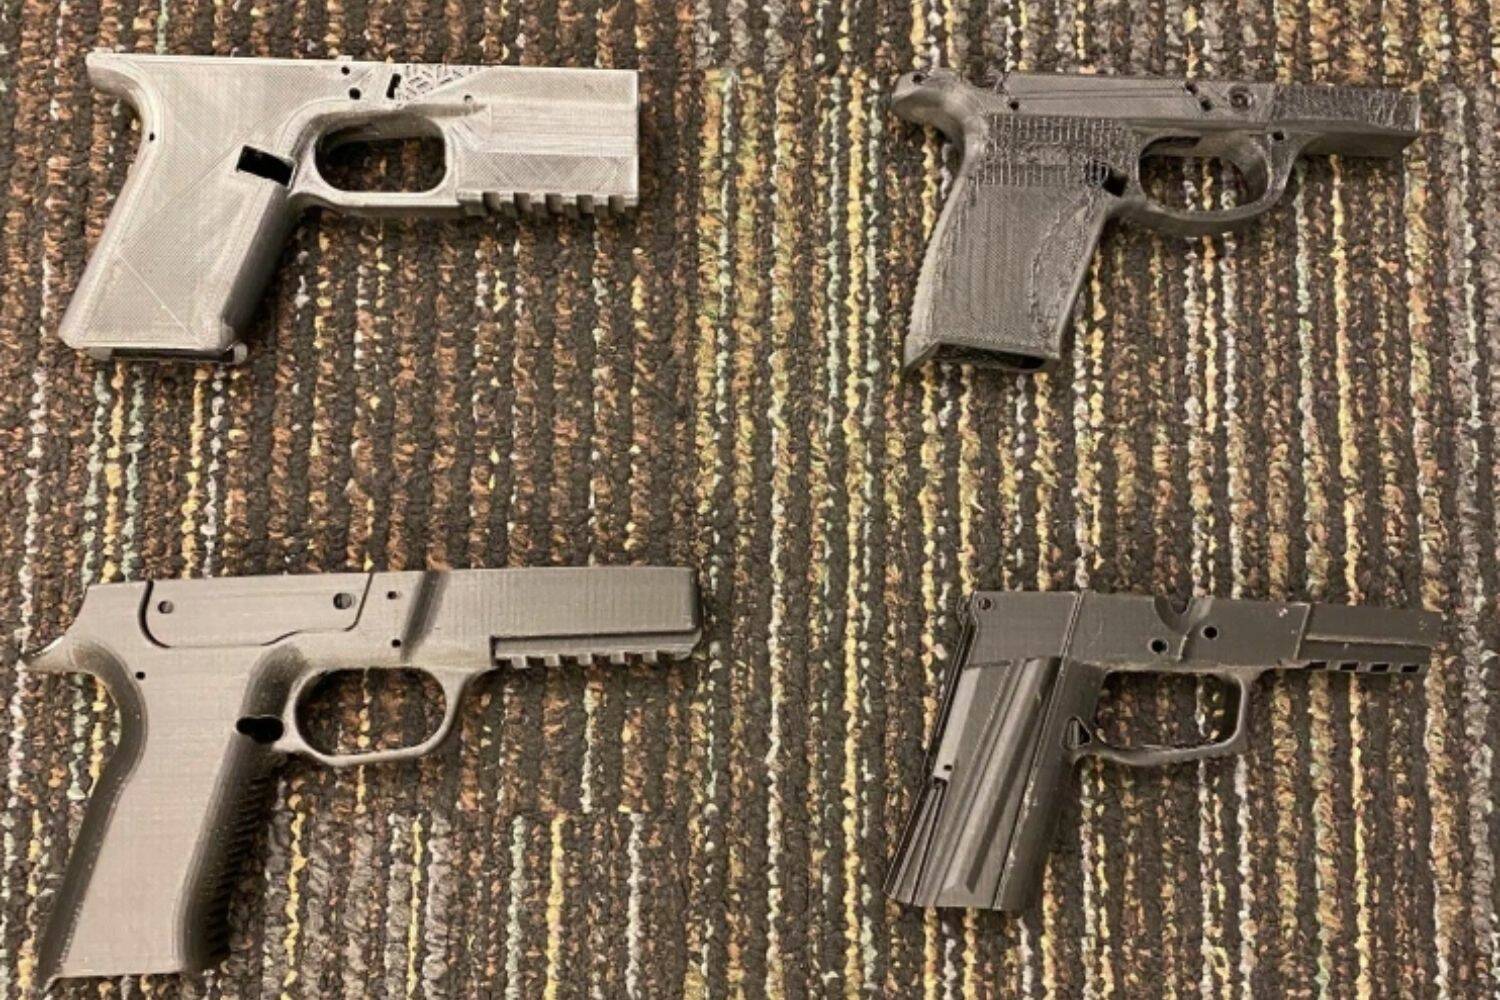 Possible 3D-printed ghost guns confiscated by Bellevue detectives during arrest of suspect. (Courtesy of Bellevue Police)